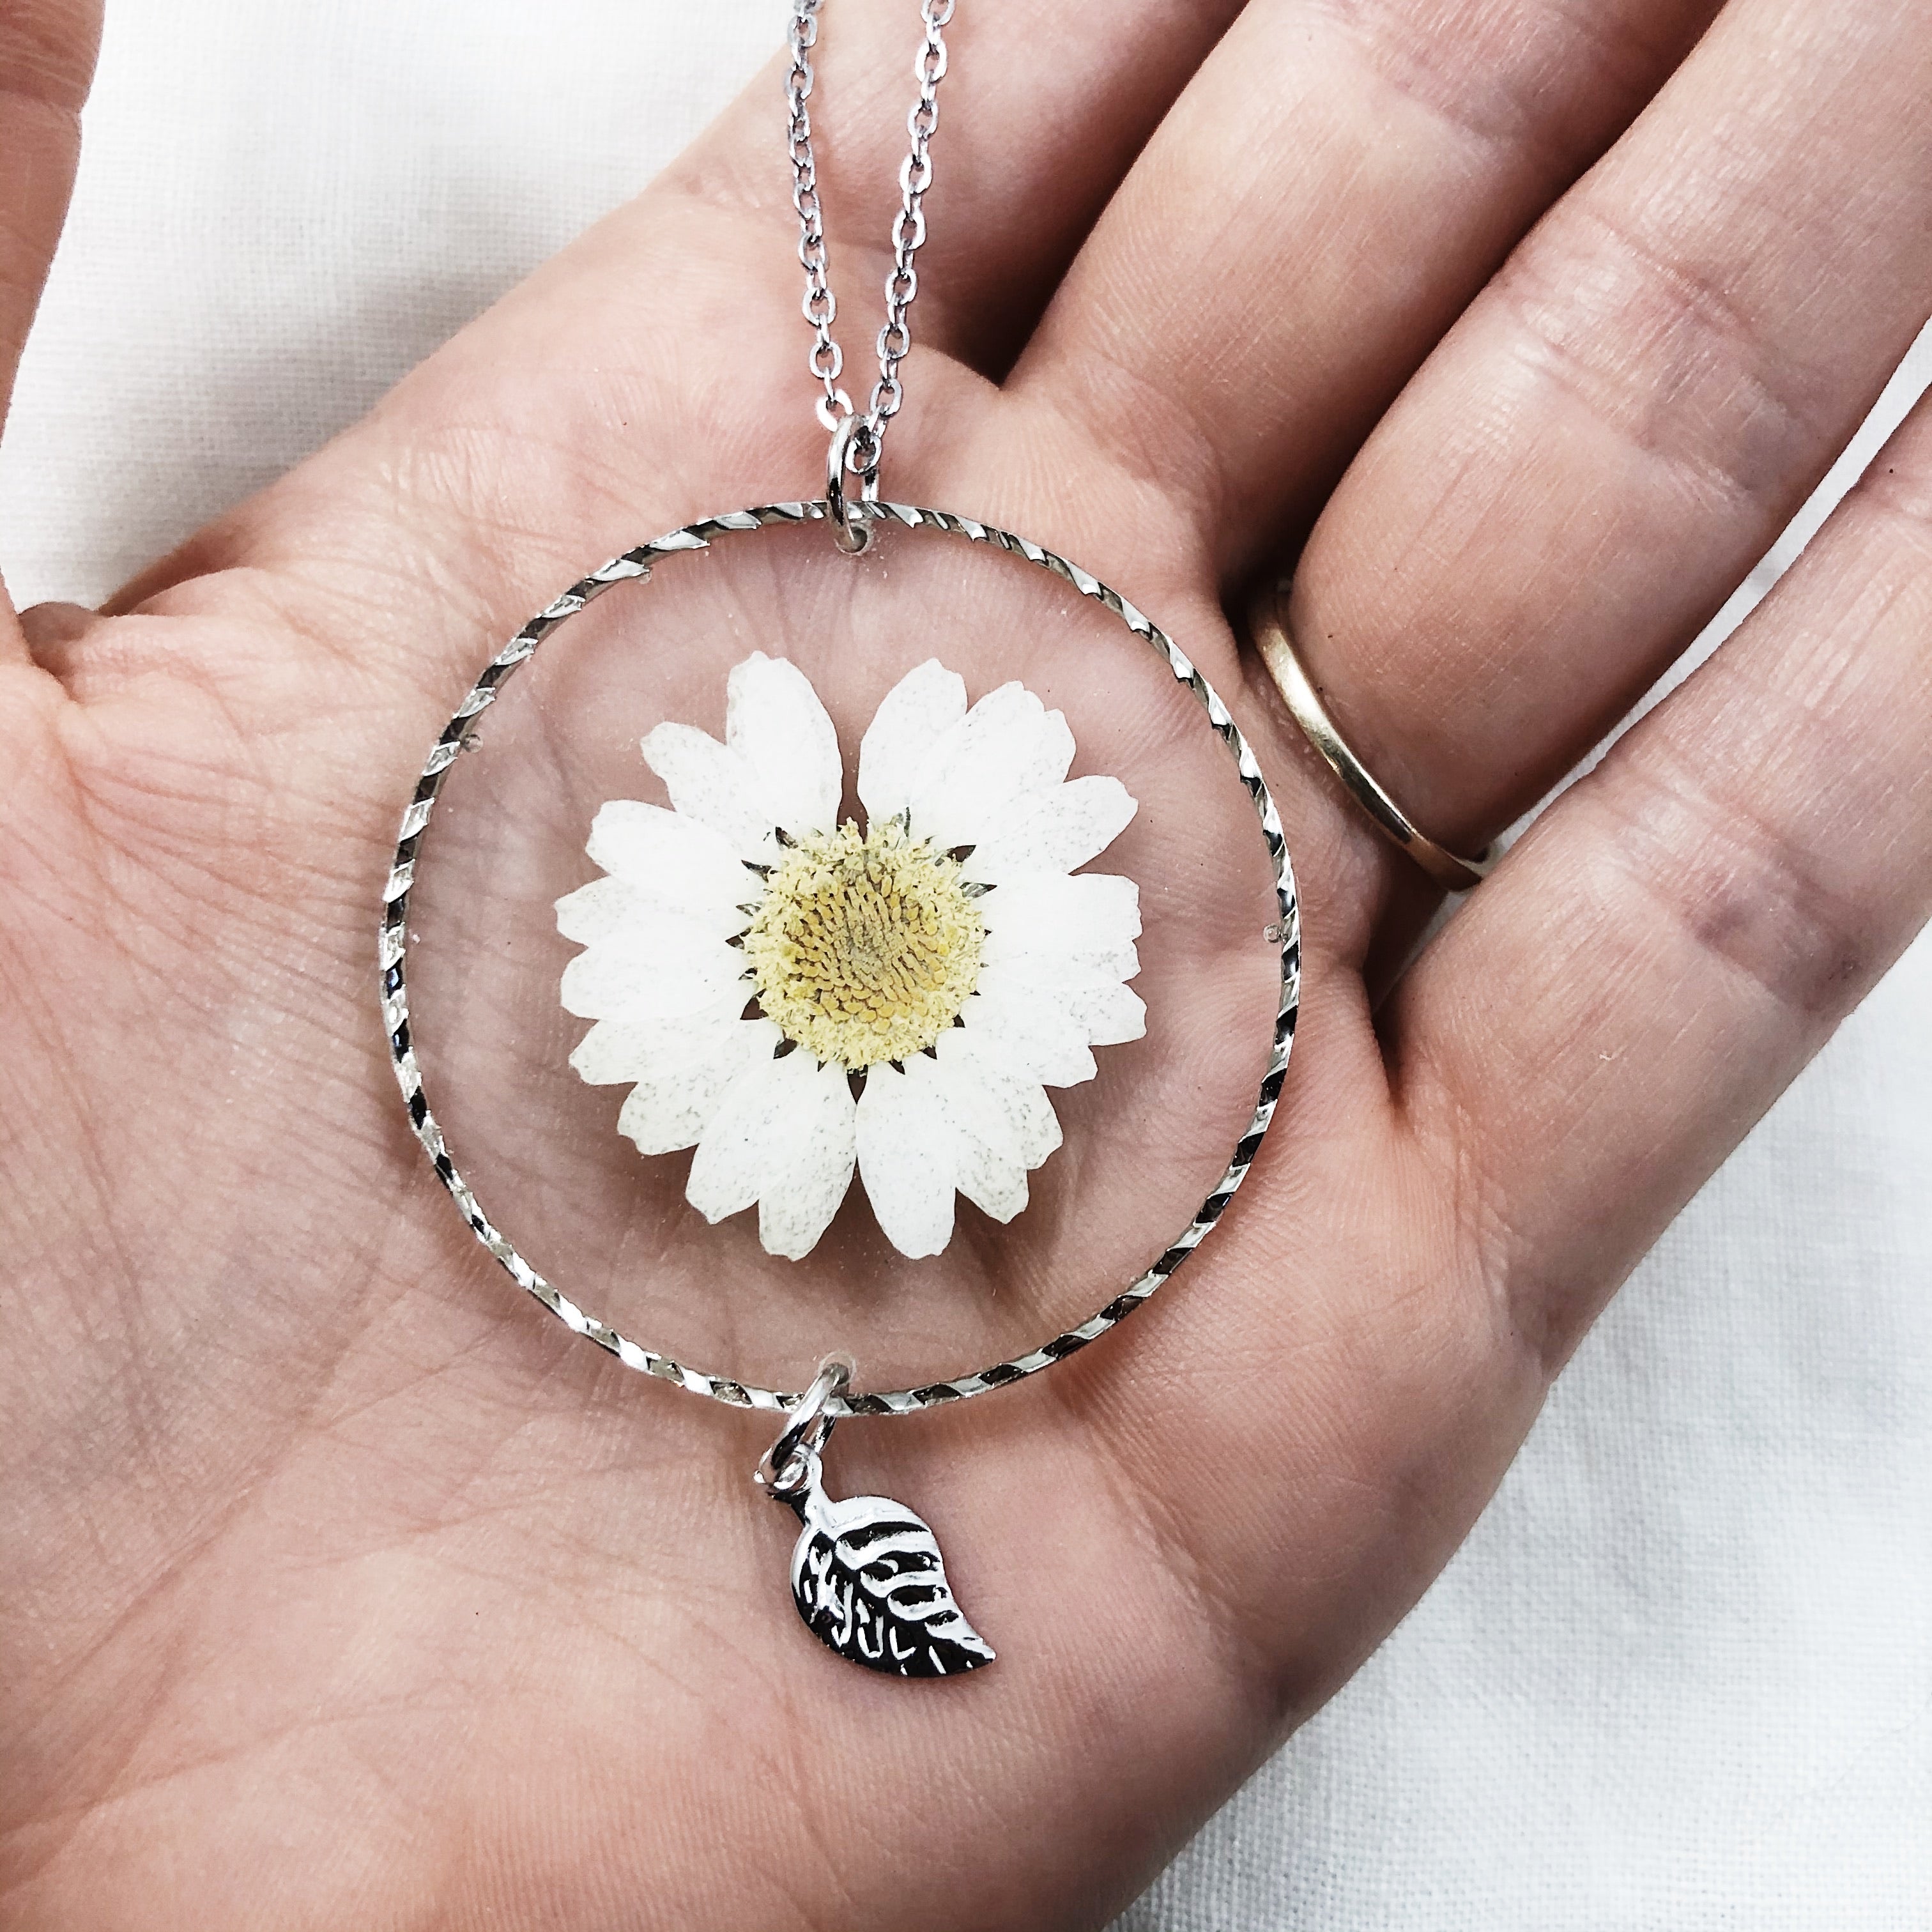 Silver Daisy Necklace with Leaf Charm